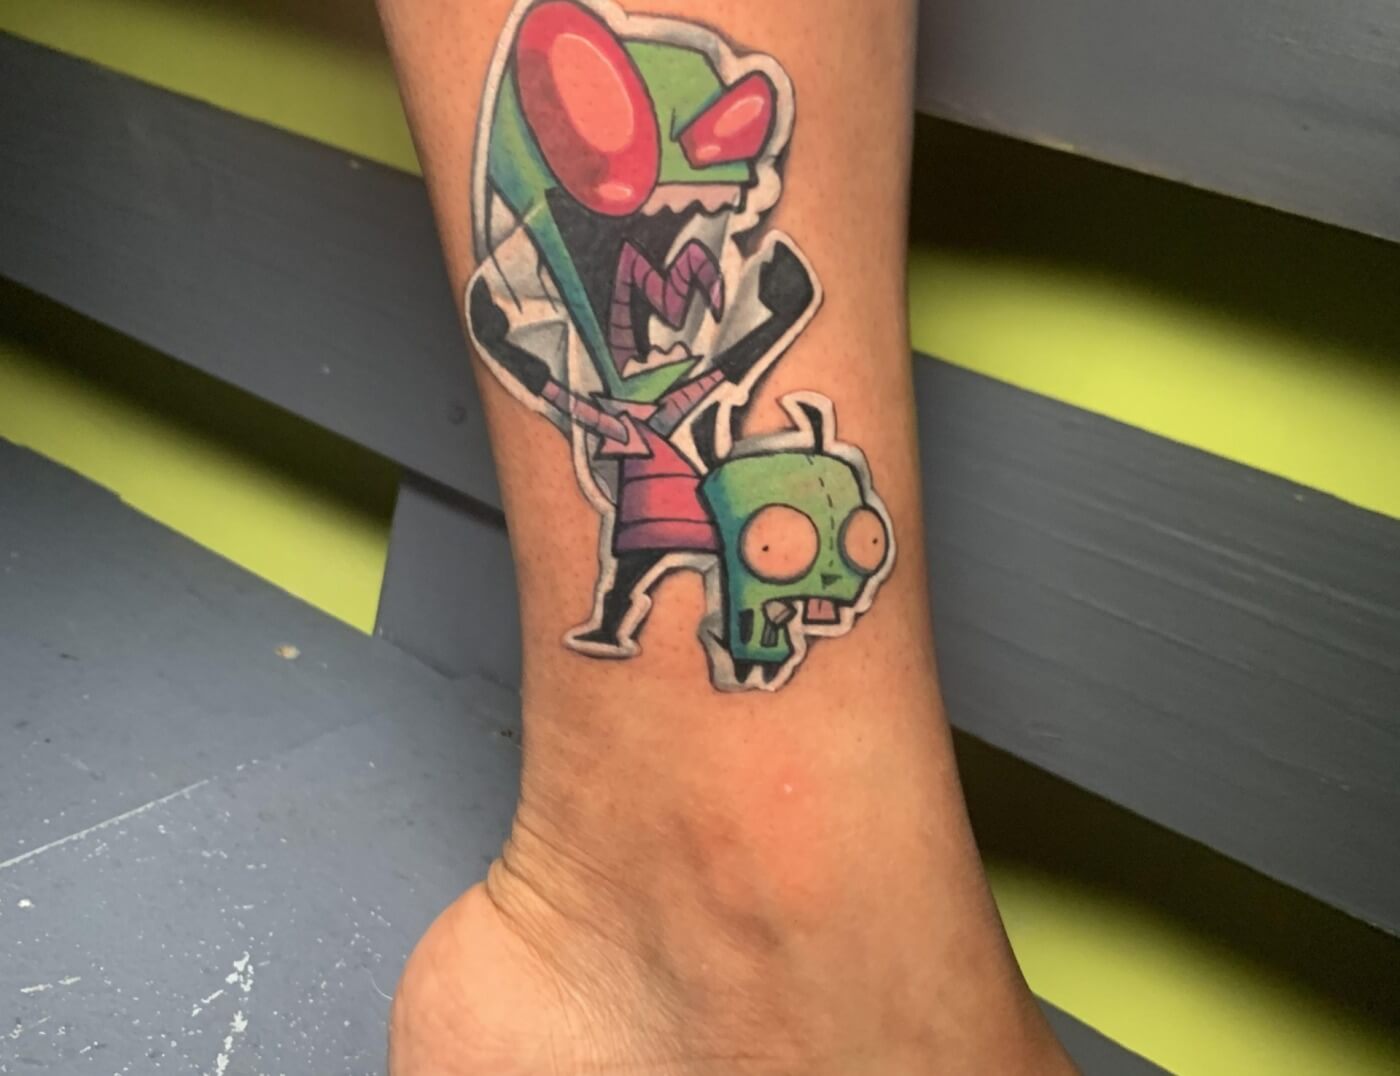 Invader Zin Anime Tattoo Designed And Inked By J.R. Outlaw Of Iron Palm Tattoos & Body Piercing. Anime tattoos are J.R.'s specialty and a favorite at Iron Palm. We're open late night until 2AM most nights. Call 404-973-7828 or stop by for a free consultation.